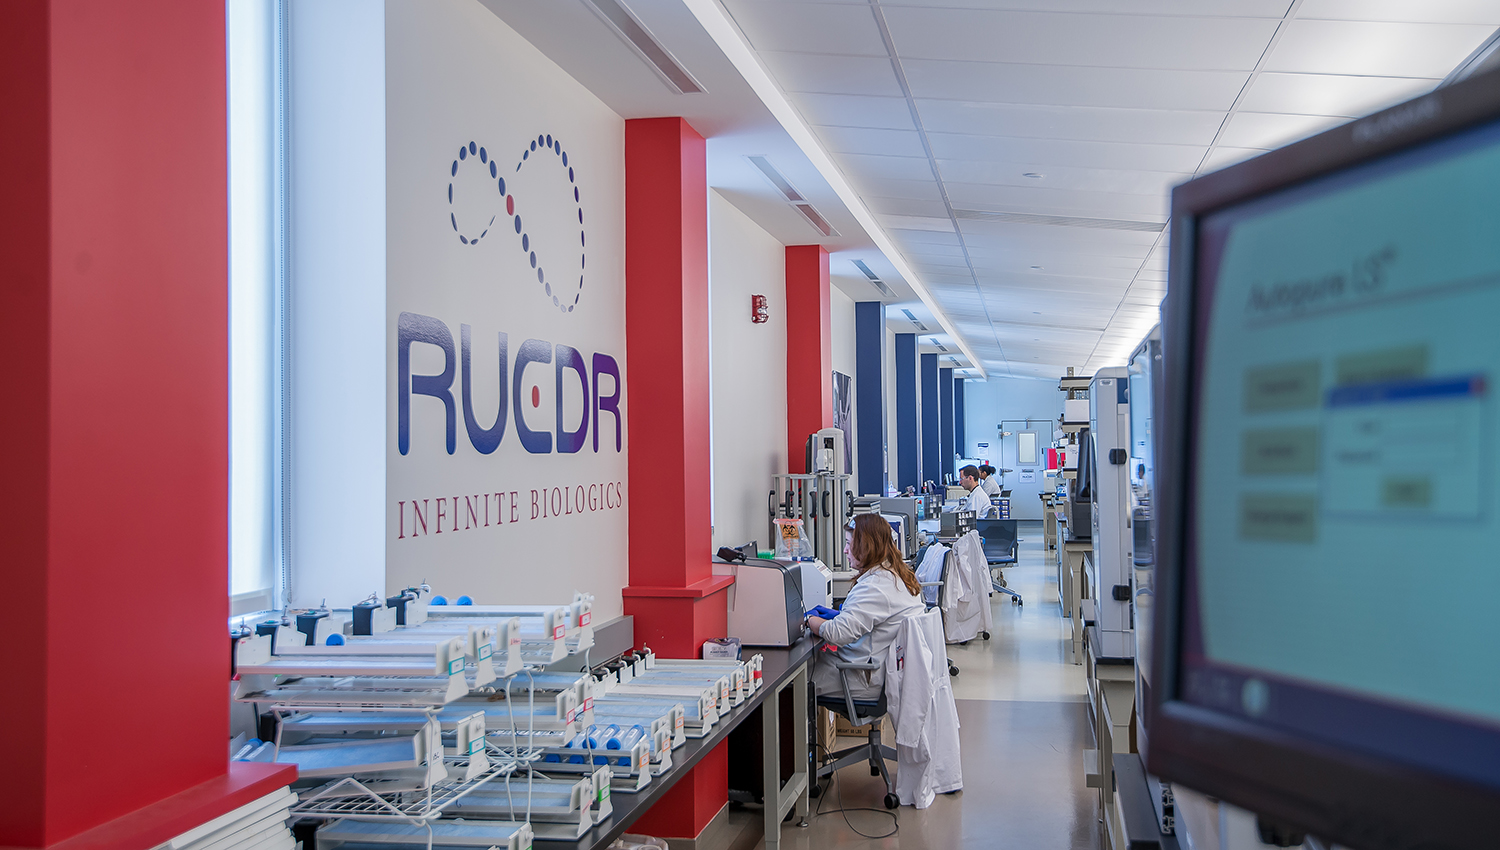 Rutgers University Cell & DNA Repository